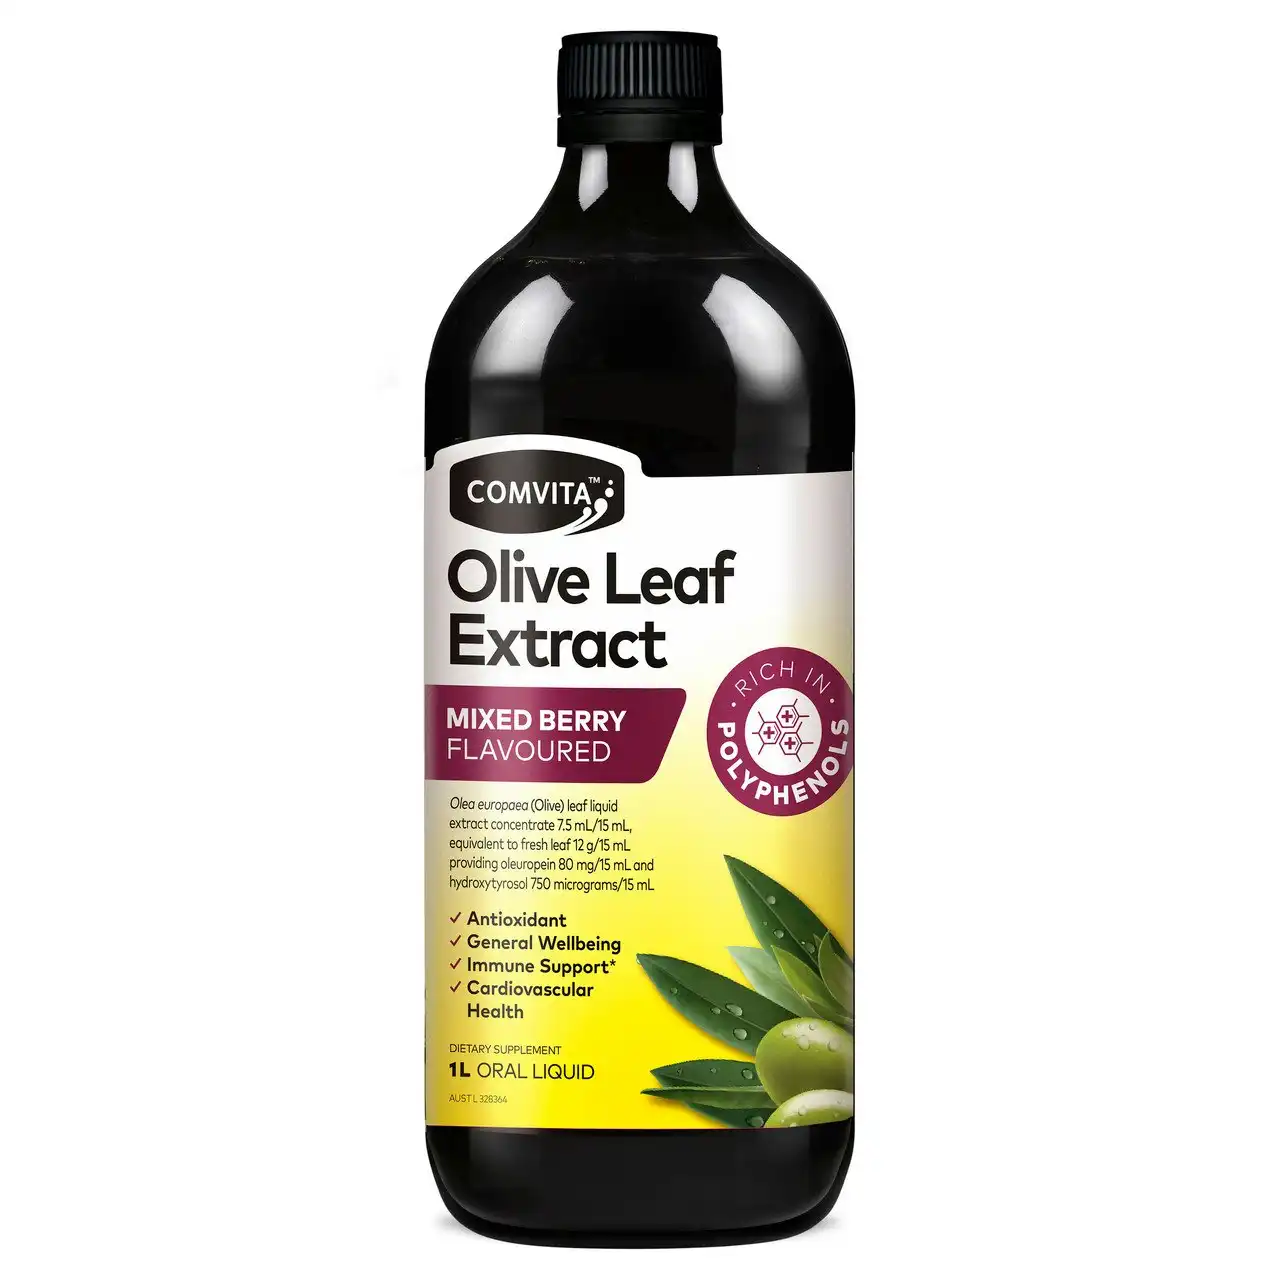 Comvita Olive Leaf Extract Mixed Berry Flavoured 1L